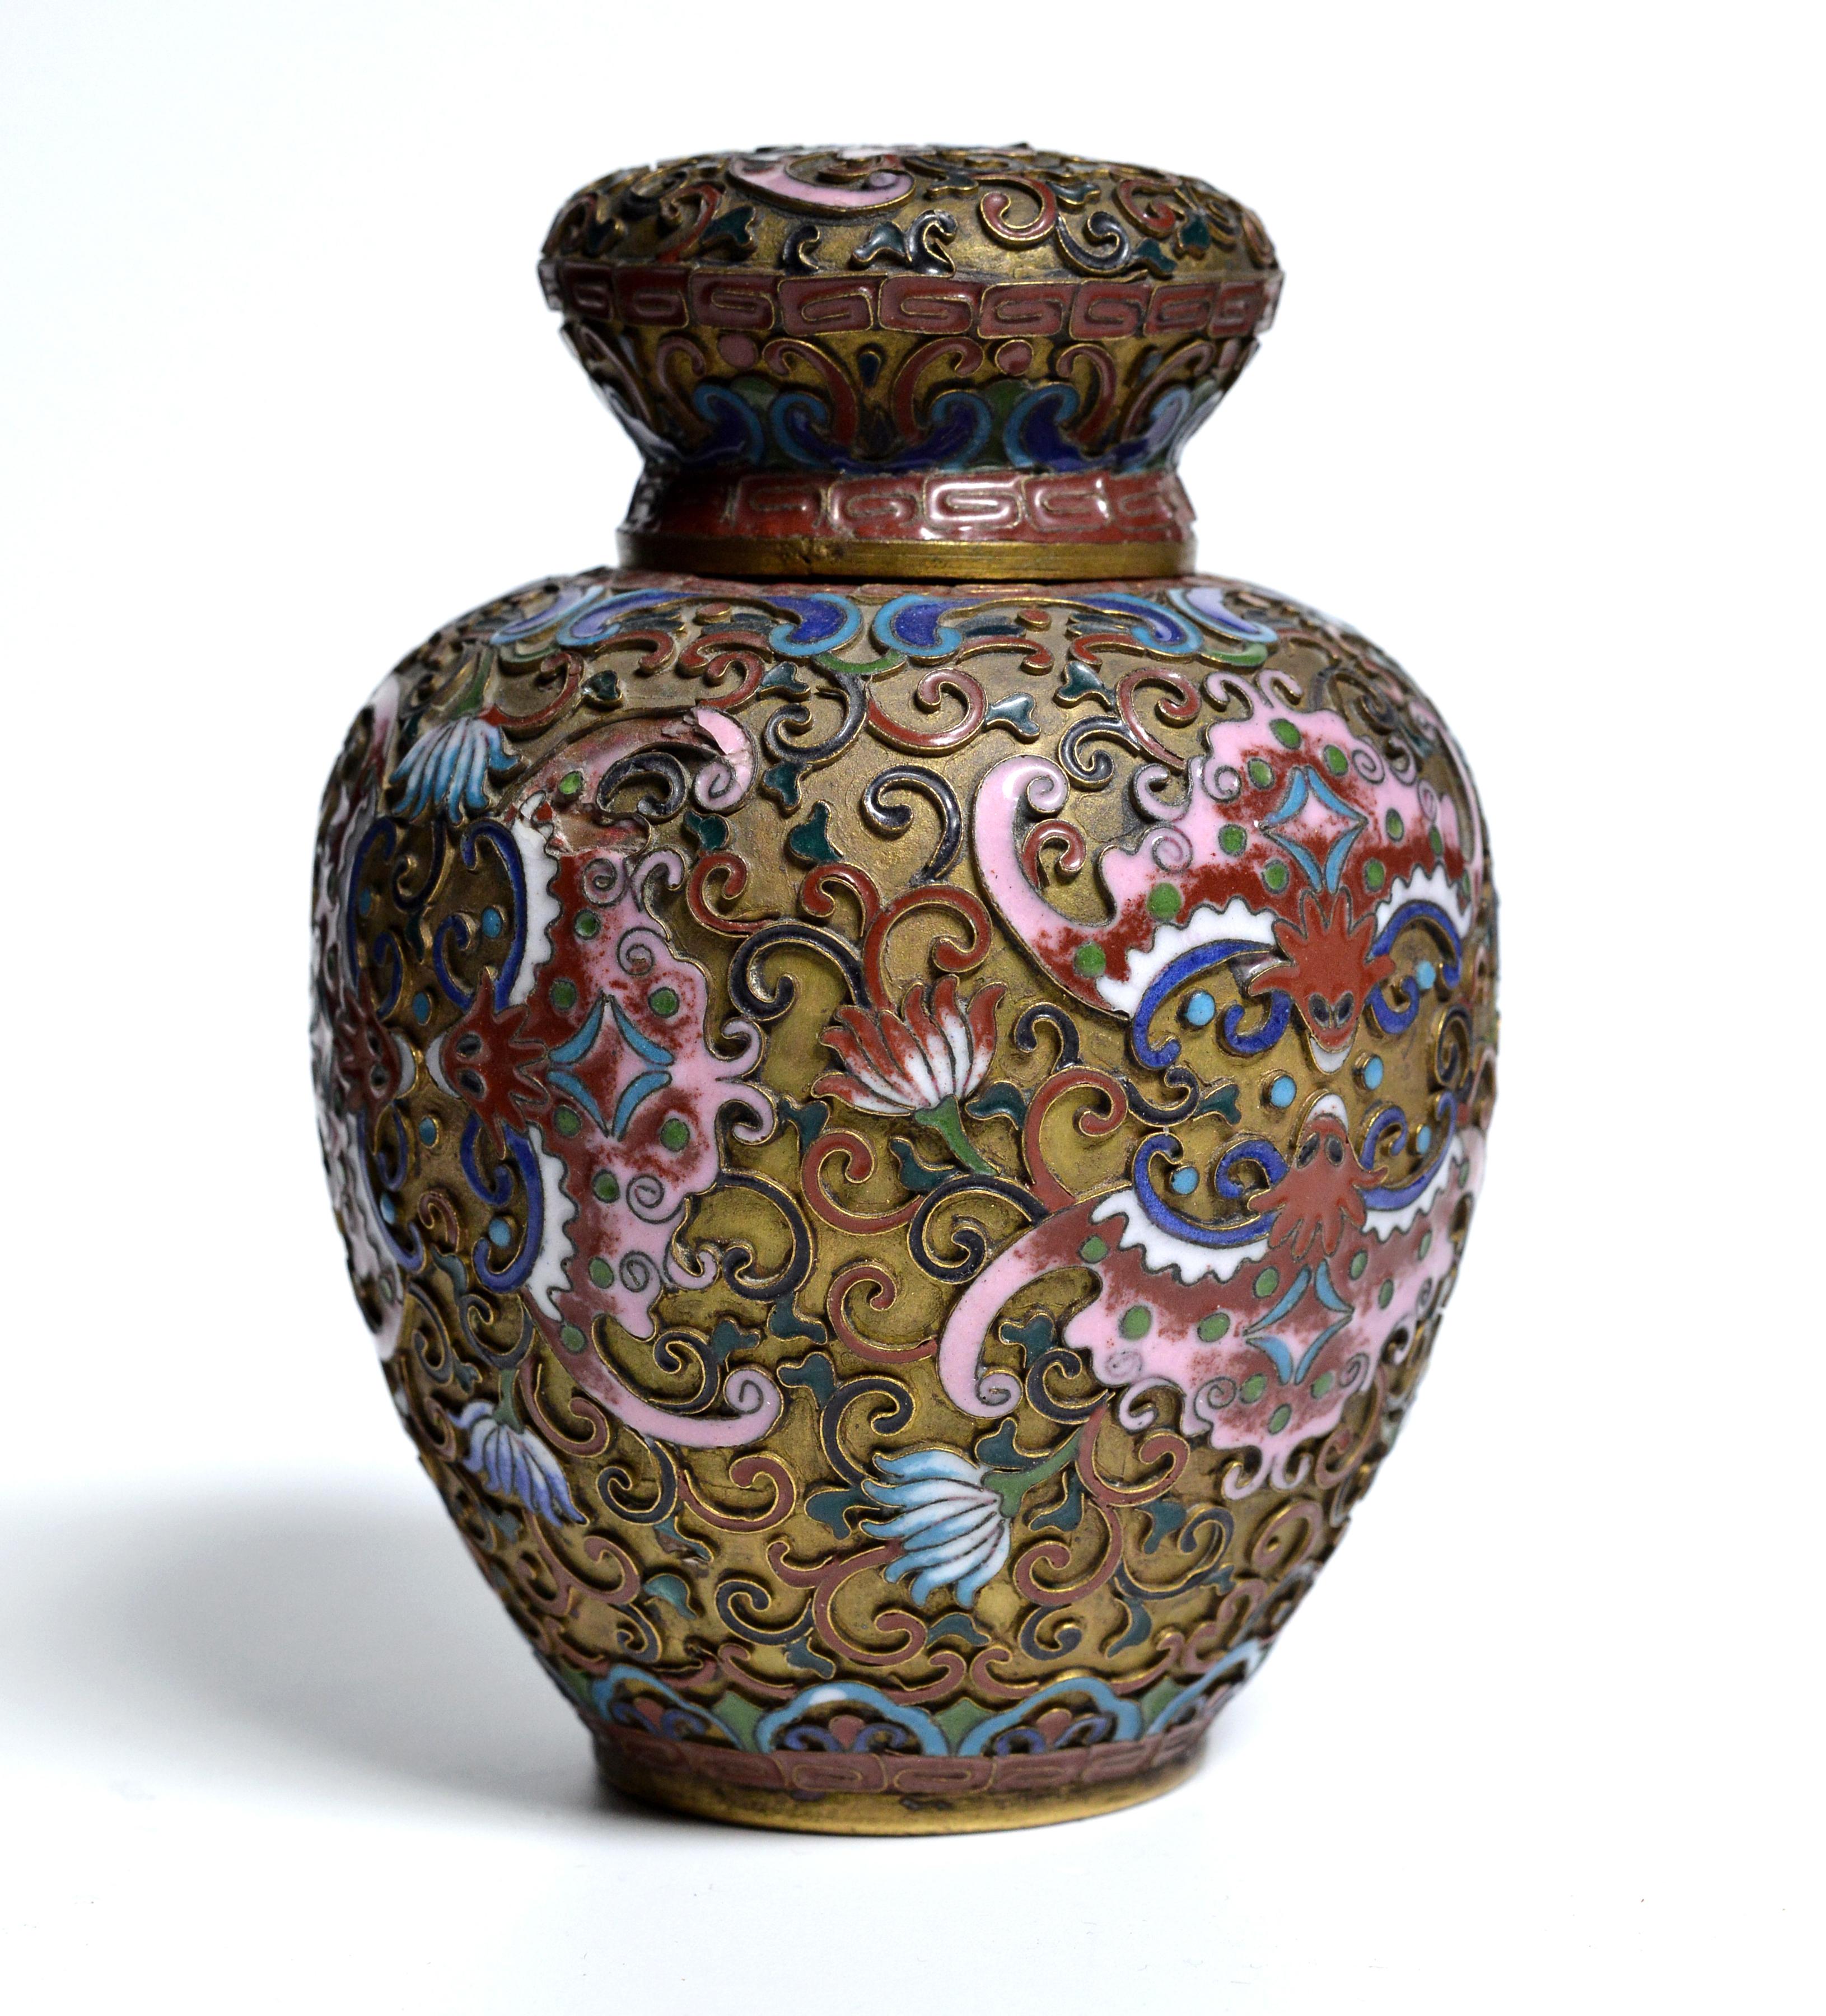 Chinese Export Antique Chinese Tea Caddy Cloisonne Enamels on Copper 19th century For Sale